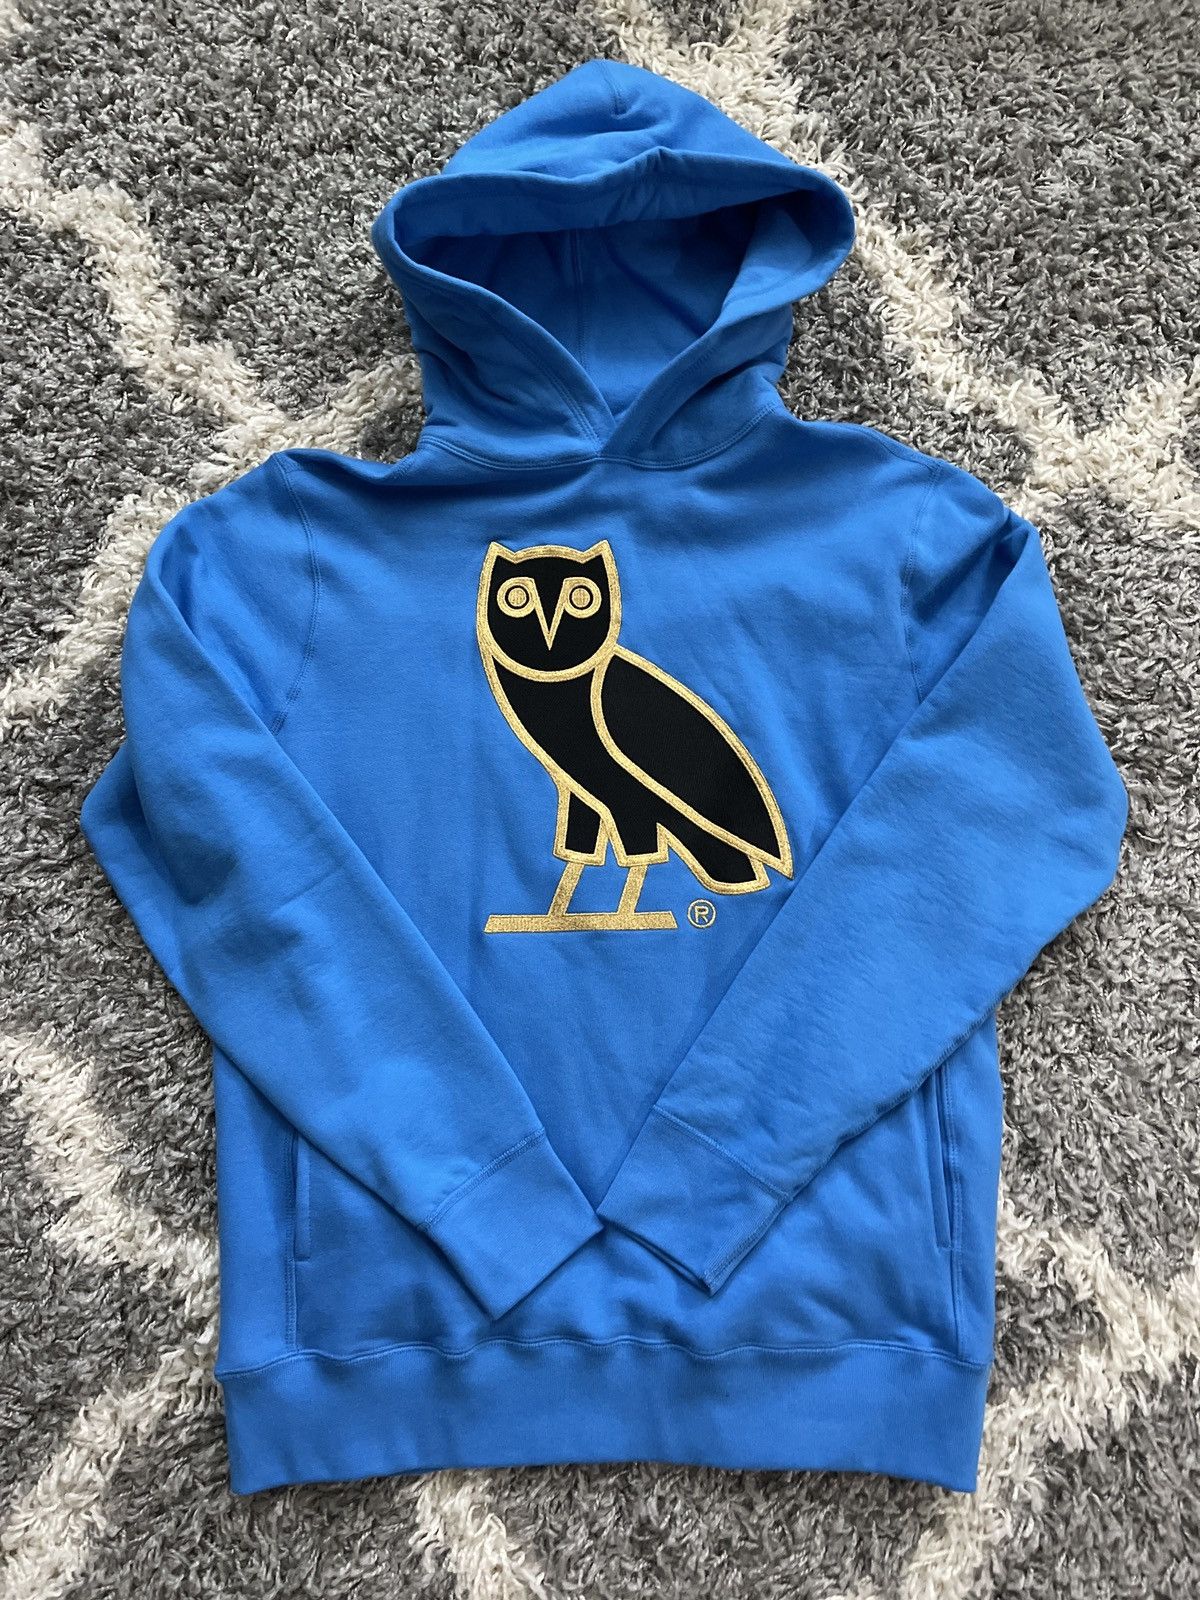 Octobers Very Own OVO Classic Owl Hoodie Bright Blue Sz L Preowned Size US L / EU 52-54 / 3 - 2 Preview